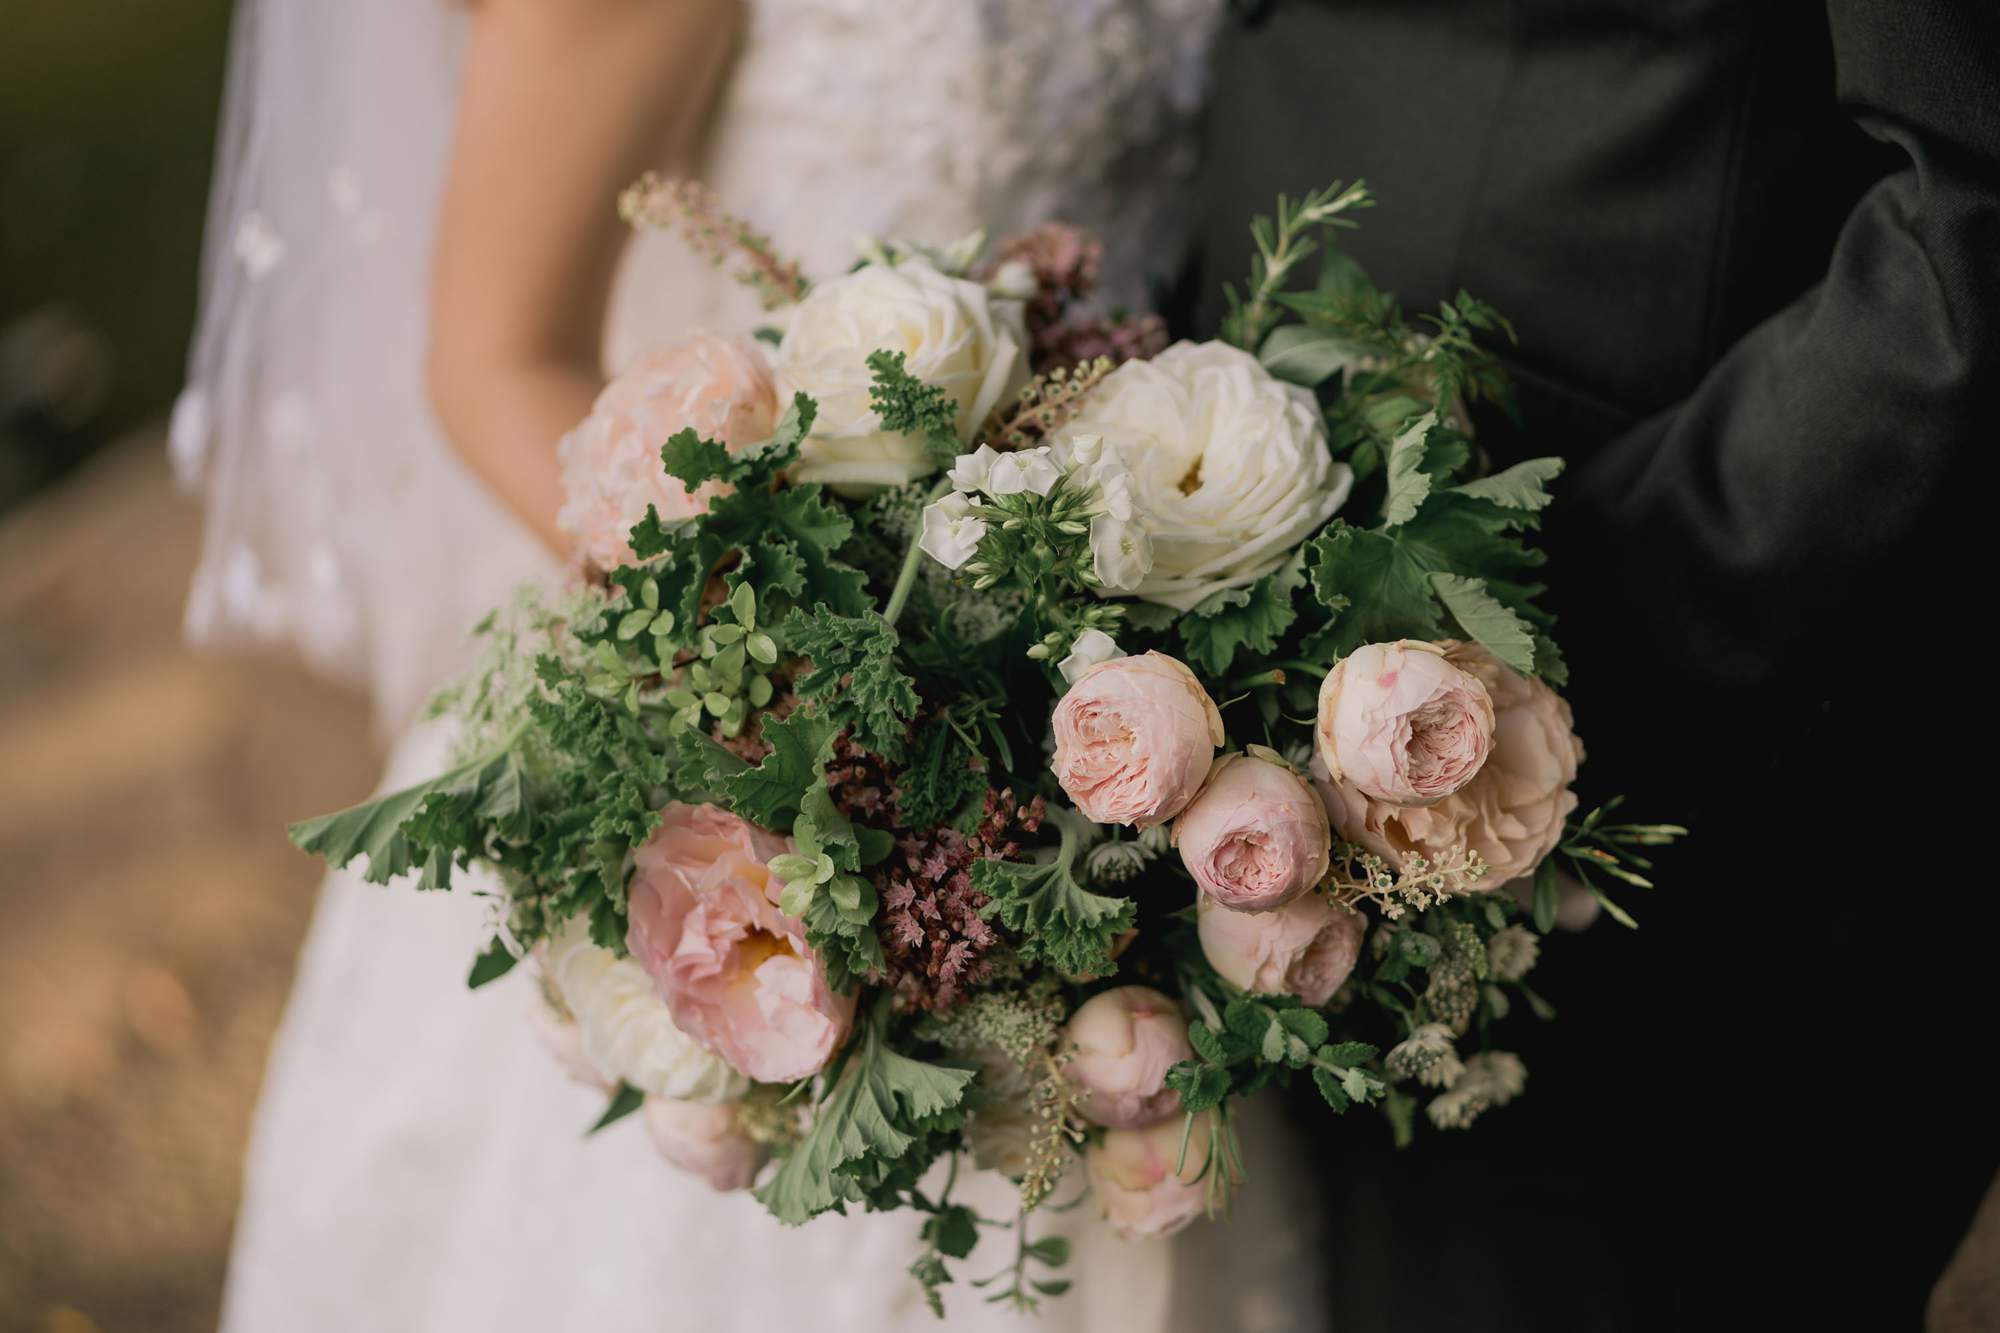 A stunning pink and white wedding bouquet.